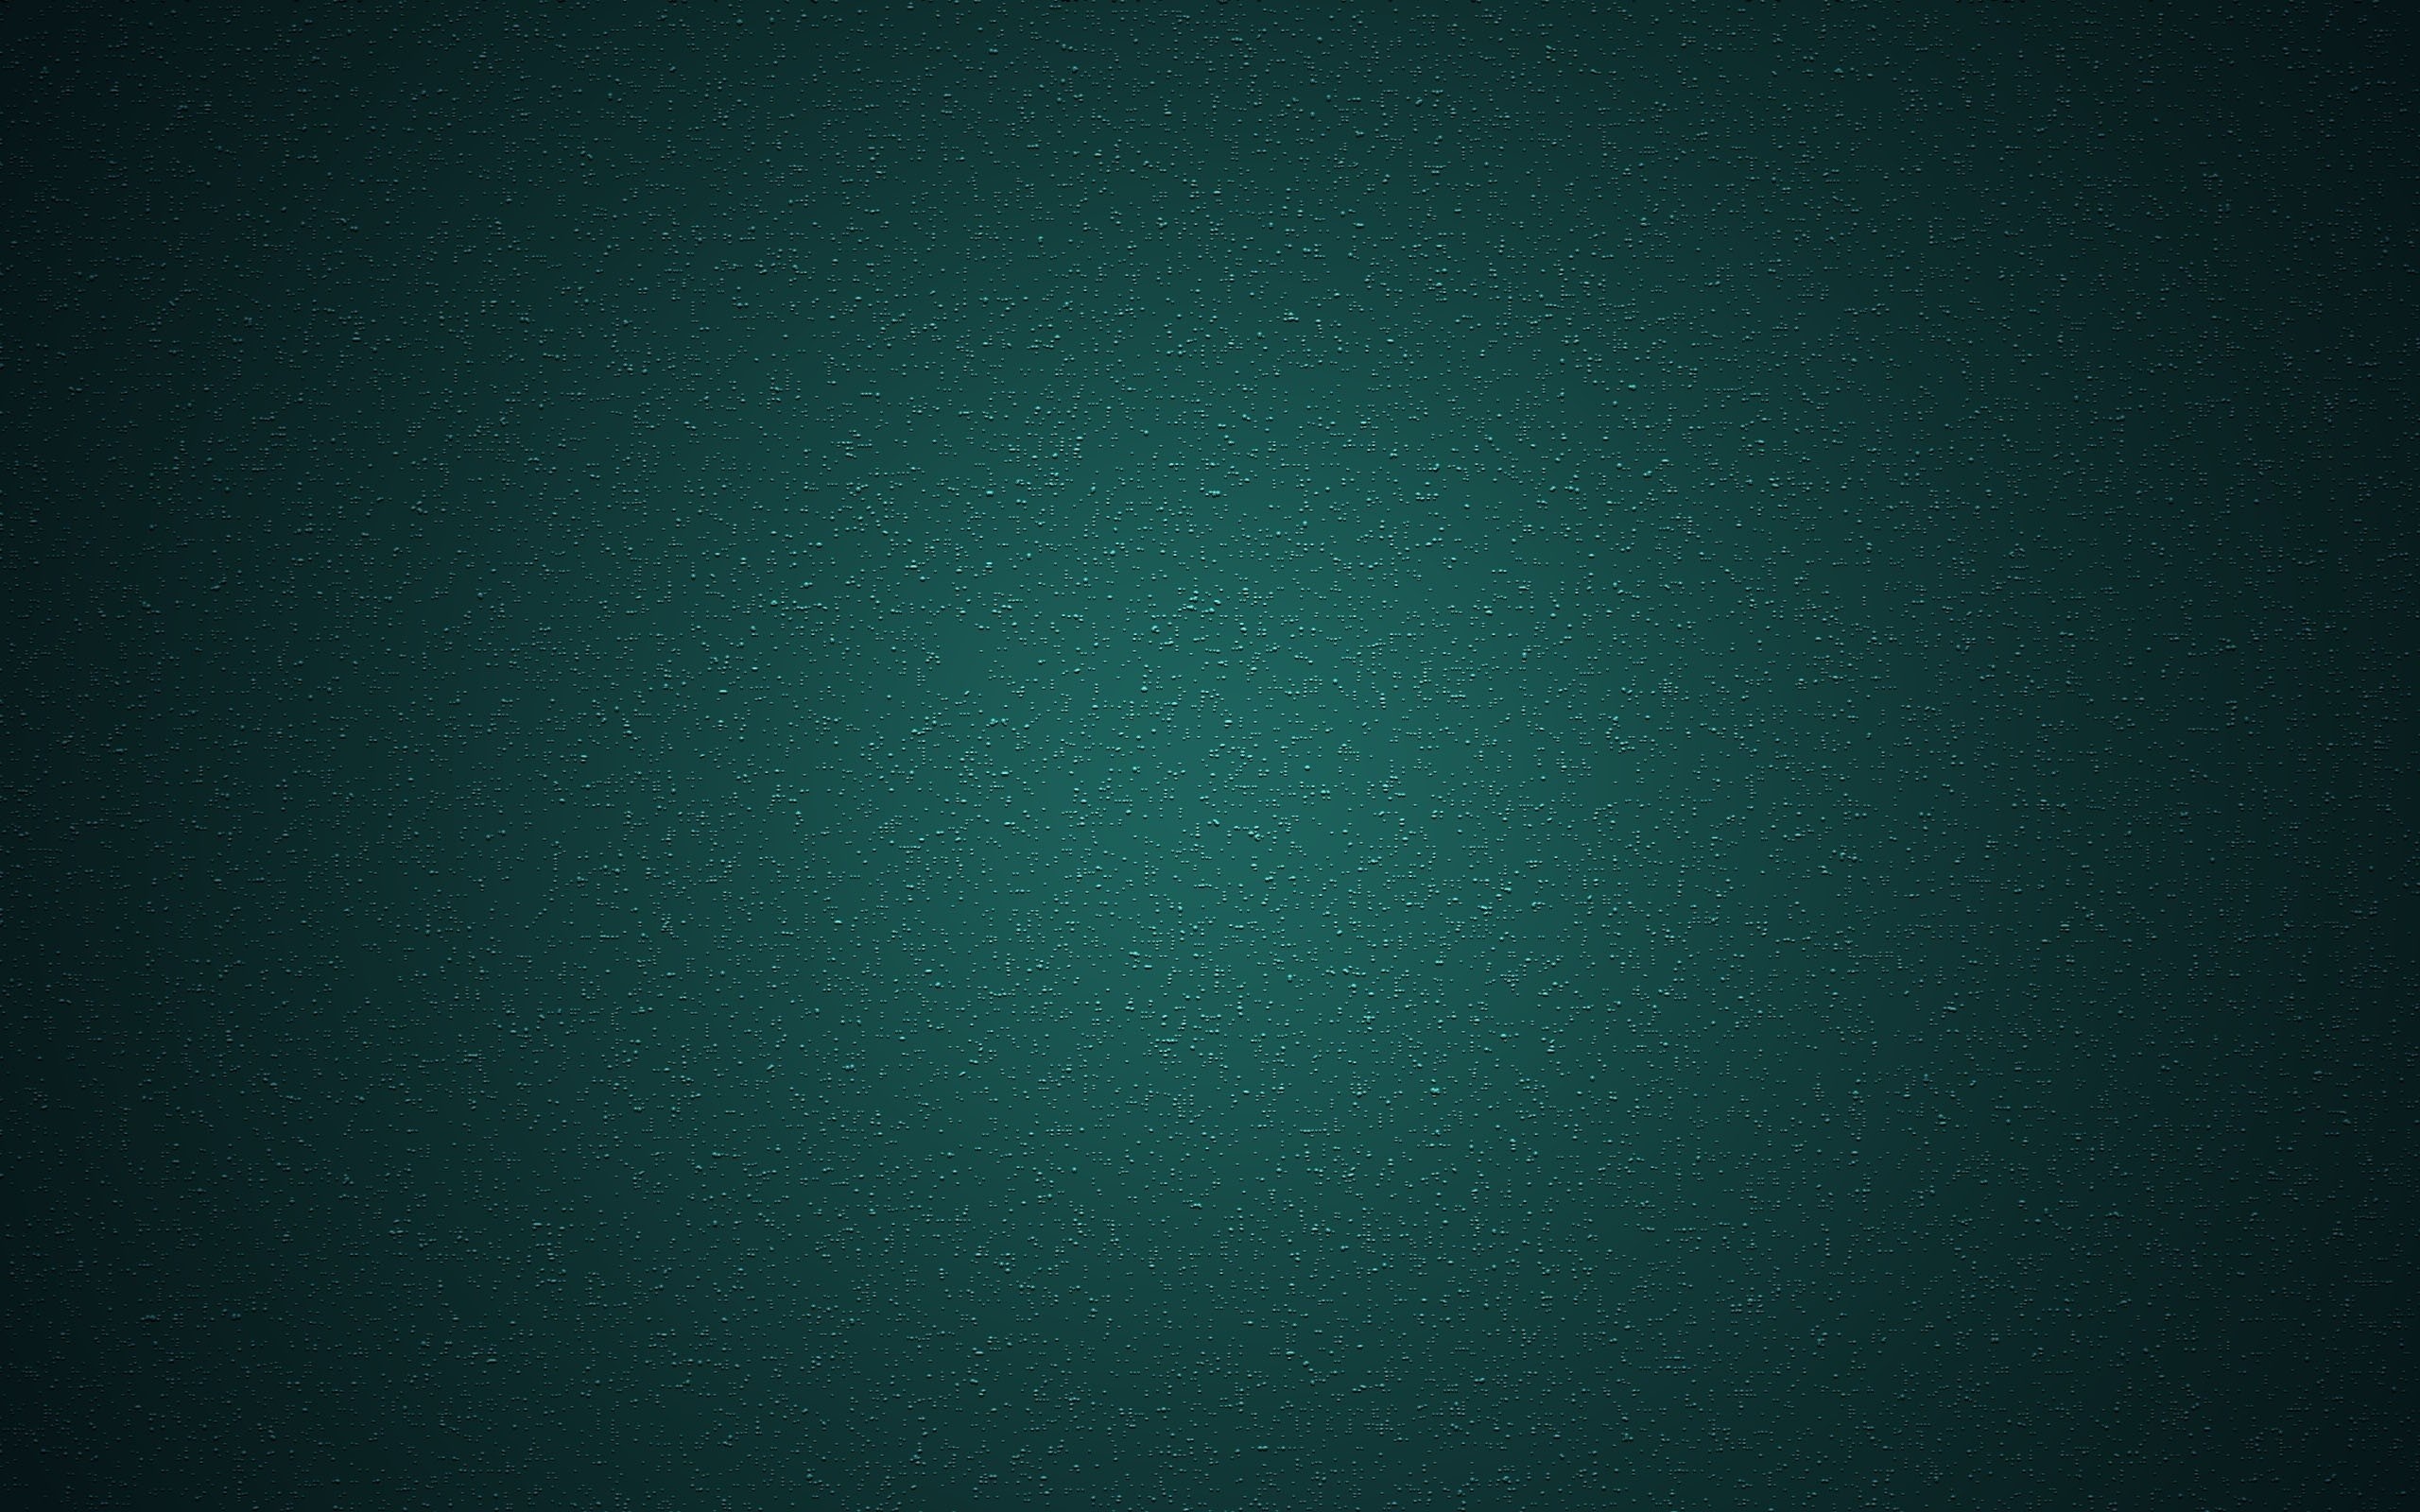 2560x1600 Dark Green Background Wallpaper Widescreen Teal For Mobile Phones Hd